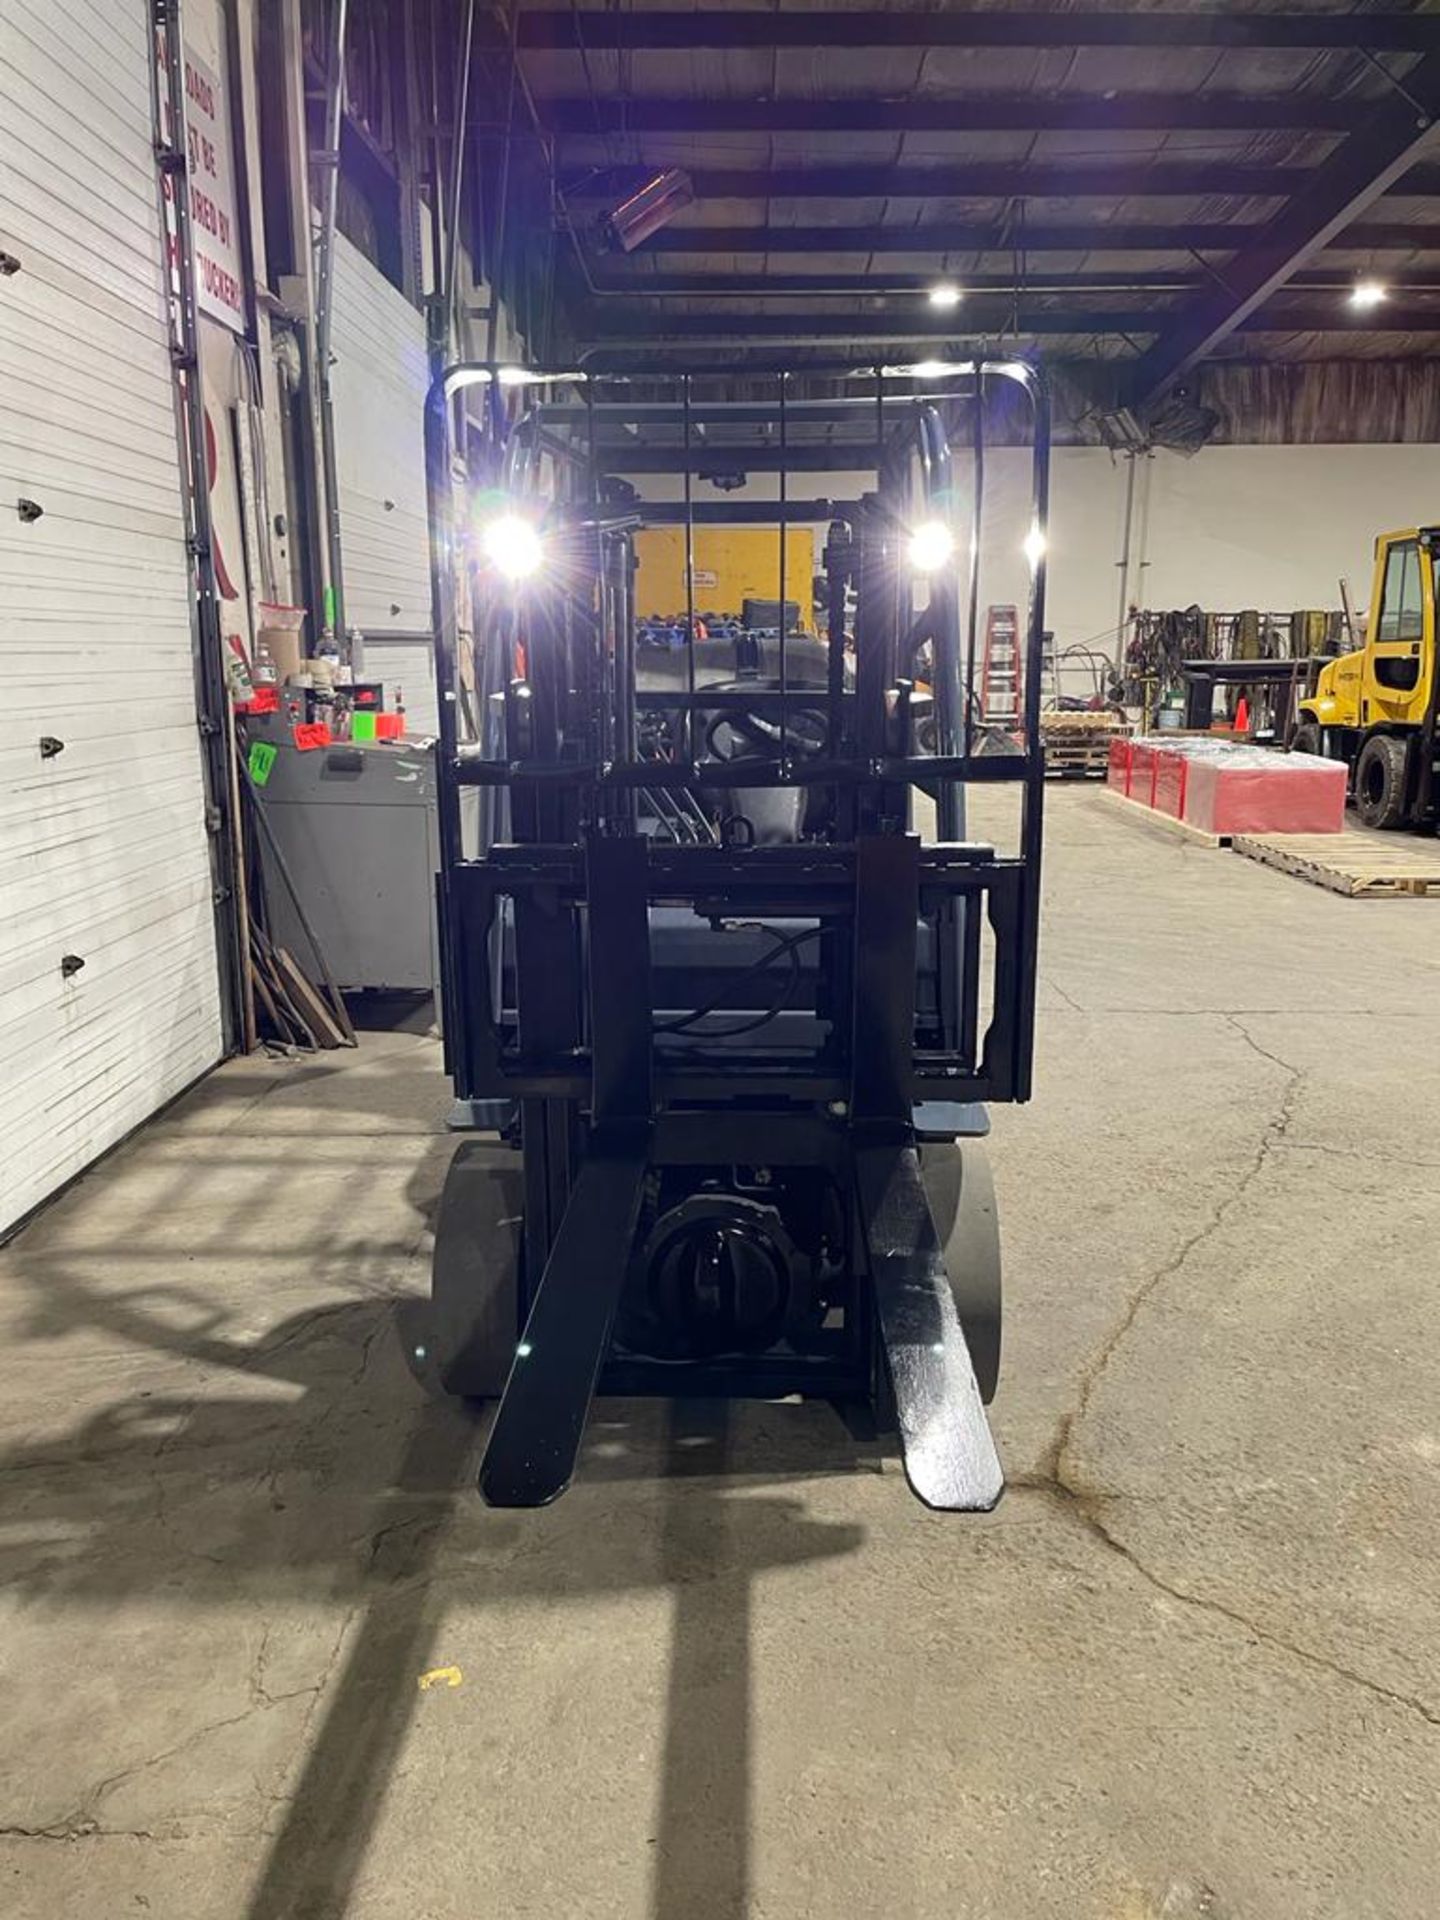 NICE 2019 Toyota 4,000lbs Capacity Forklift LPG (propane) with sideshift (no propane tank included) - Image 3 of 3